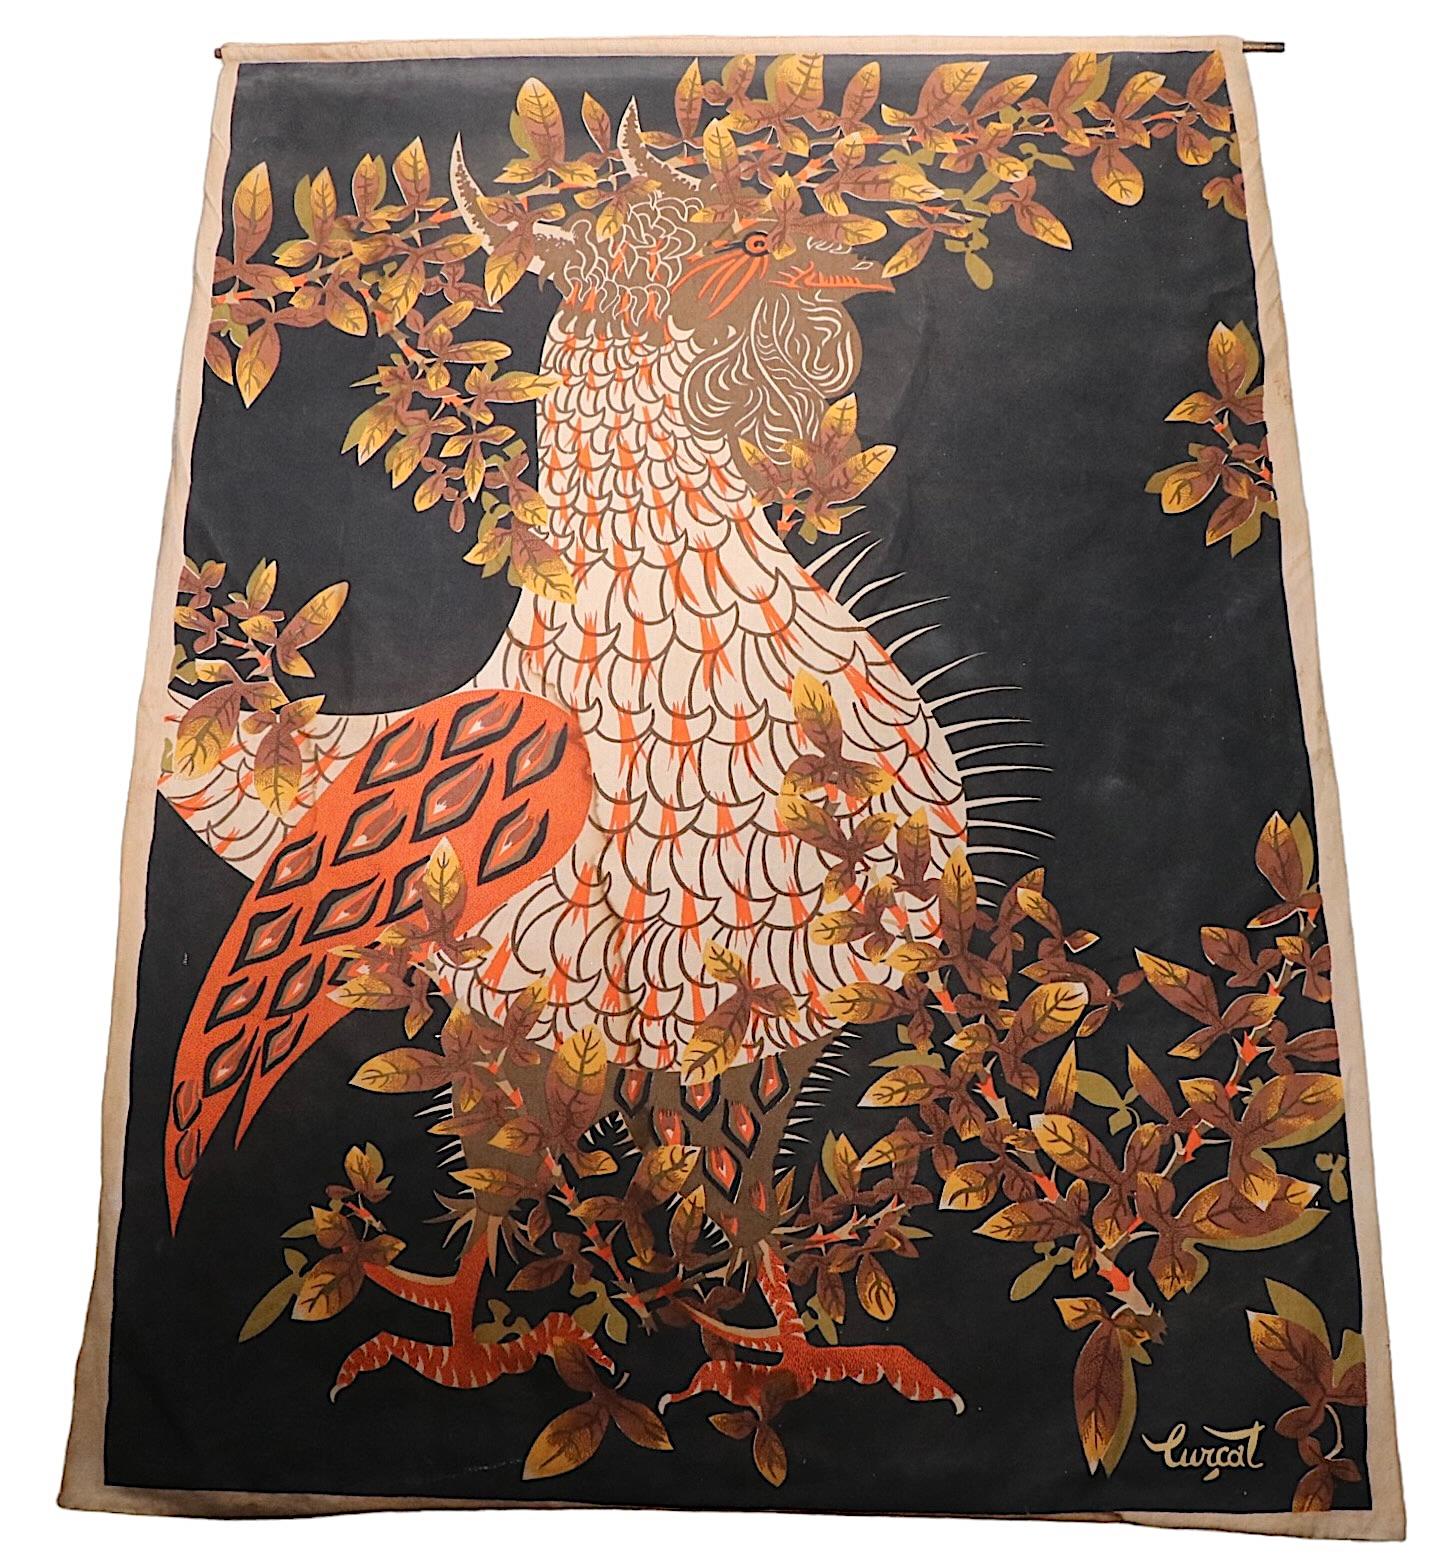 20th Century Large Wall Hanging Litho Print on Fabric by Lucat Le Tanager Made in France 